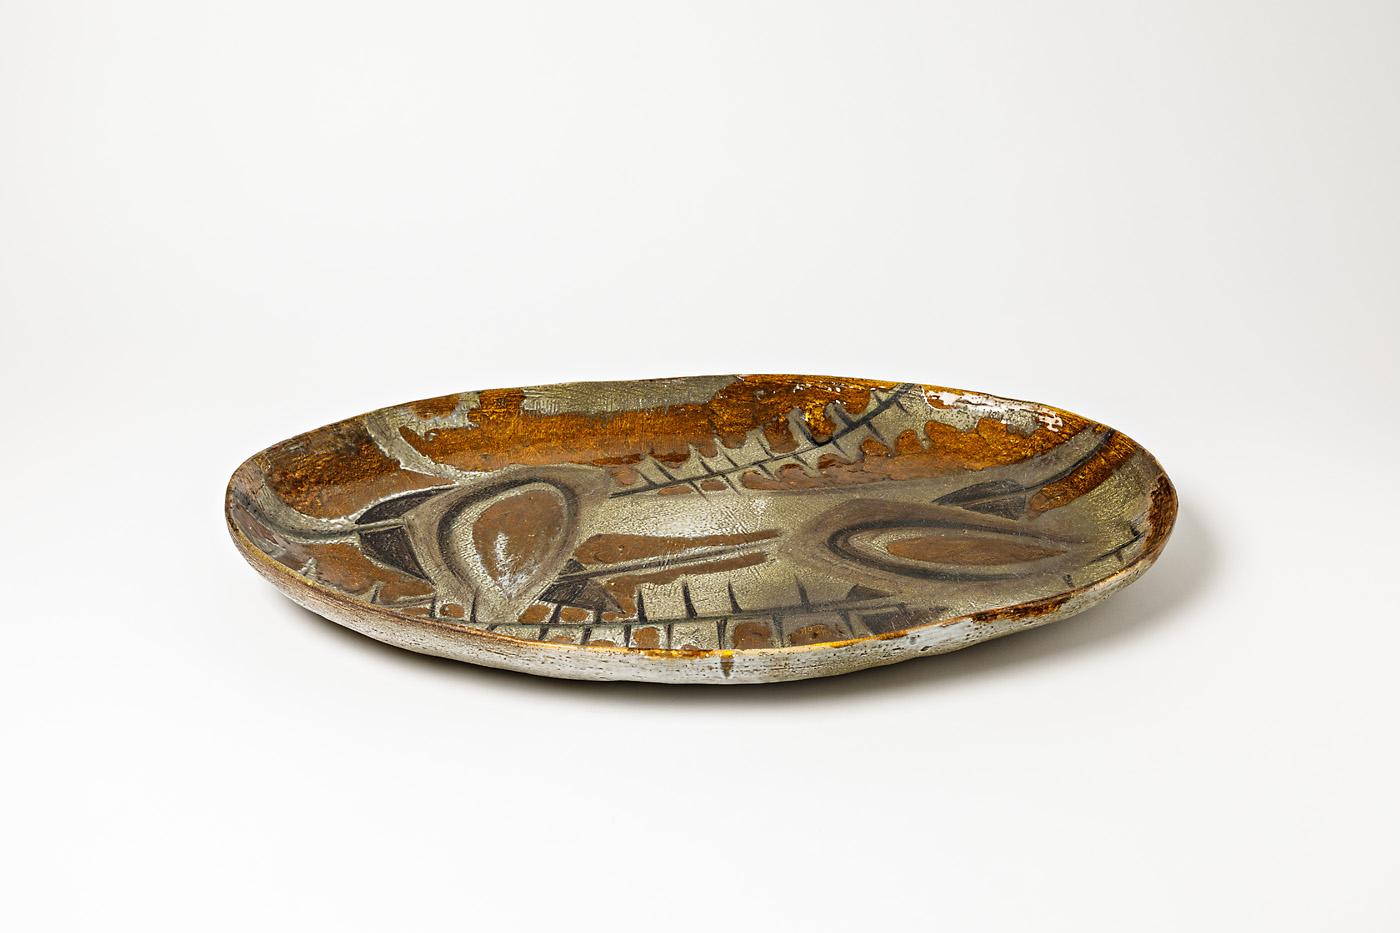 French Exceptionnal Ceramic Dish by Atelier Madoura, ‘Style of Picasso’, circa 1960